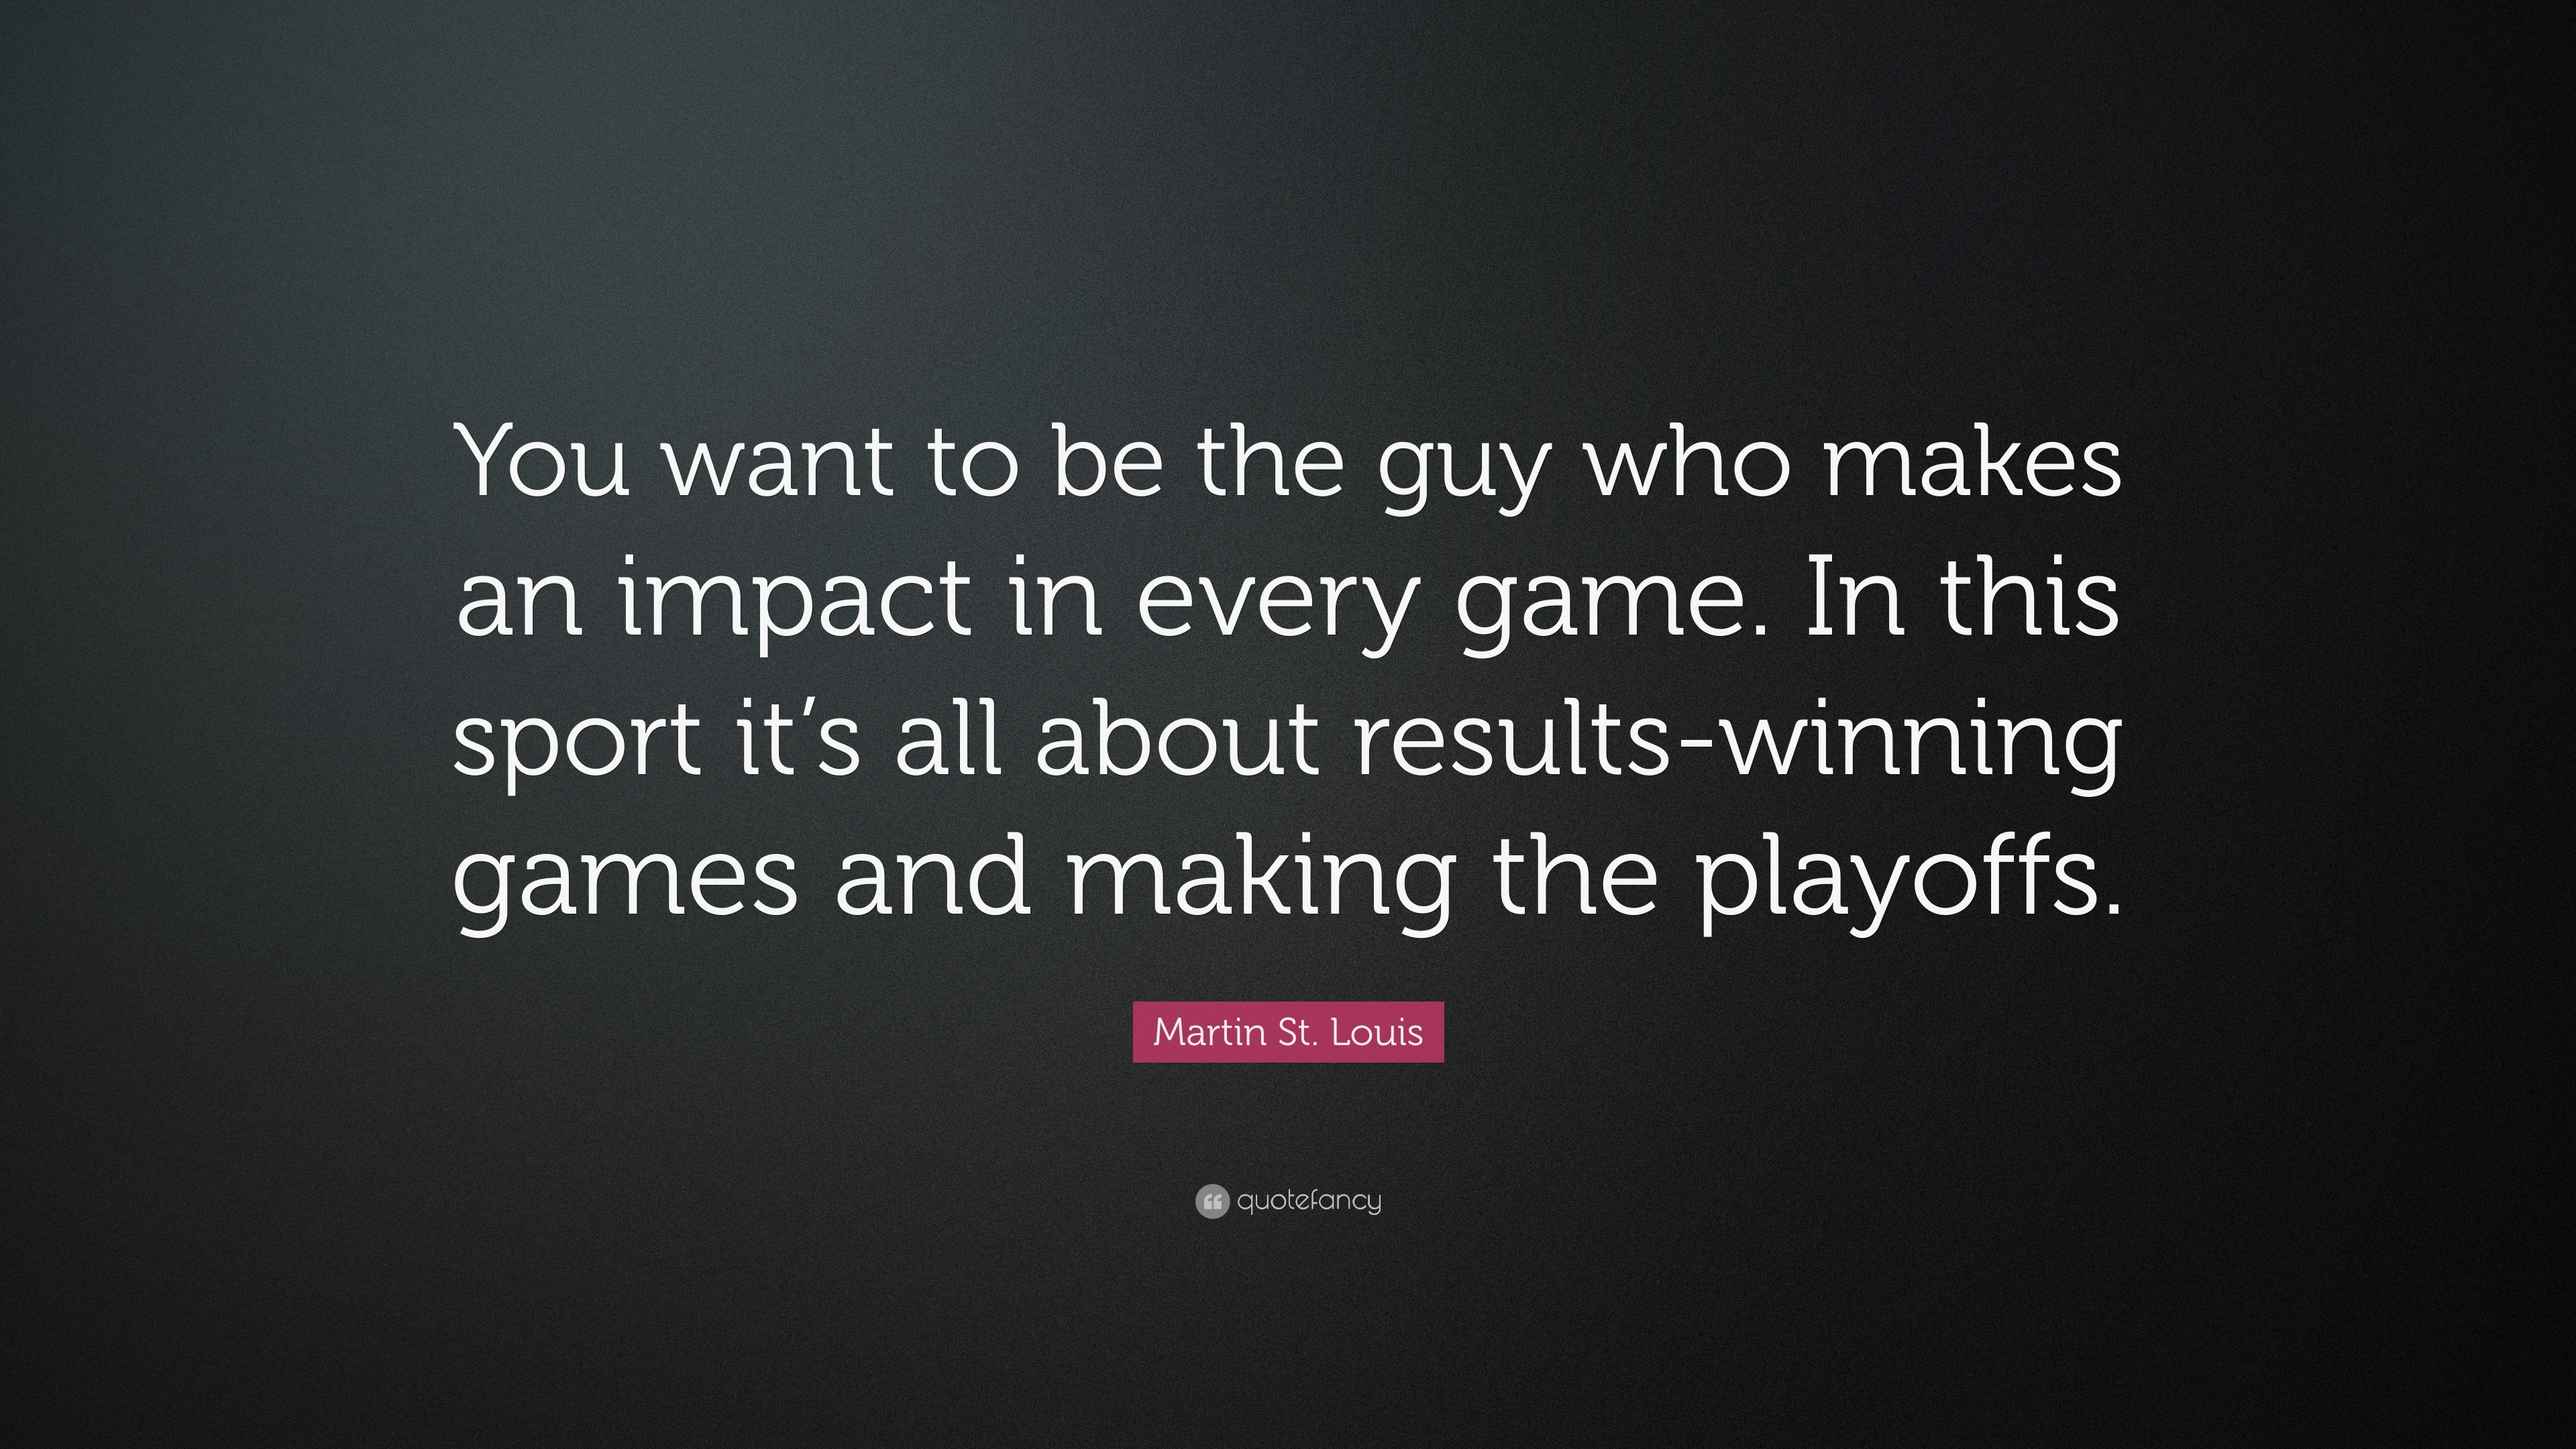 Martin St. Louis Quote: “You want to be the guy who makes an impact in ...